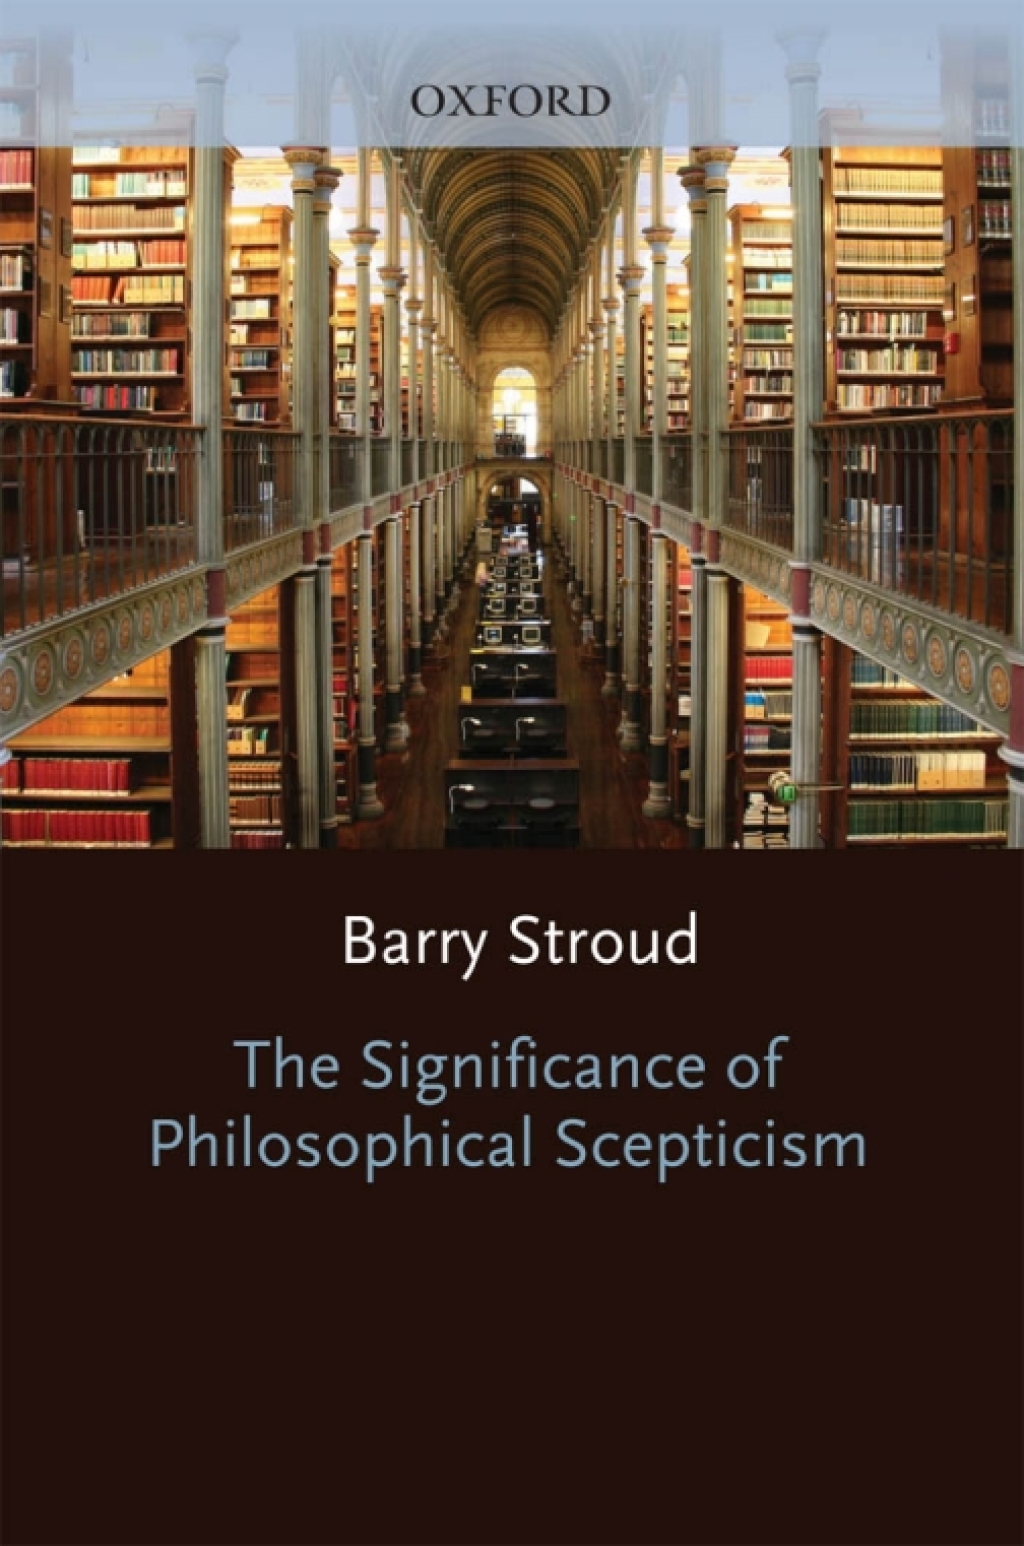 The Significance of Philosophical Scepticism (eBook Rental) - Barry Stroud,